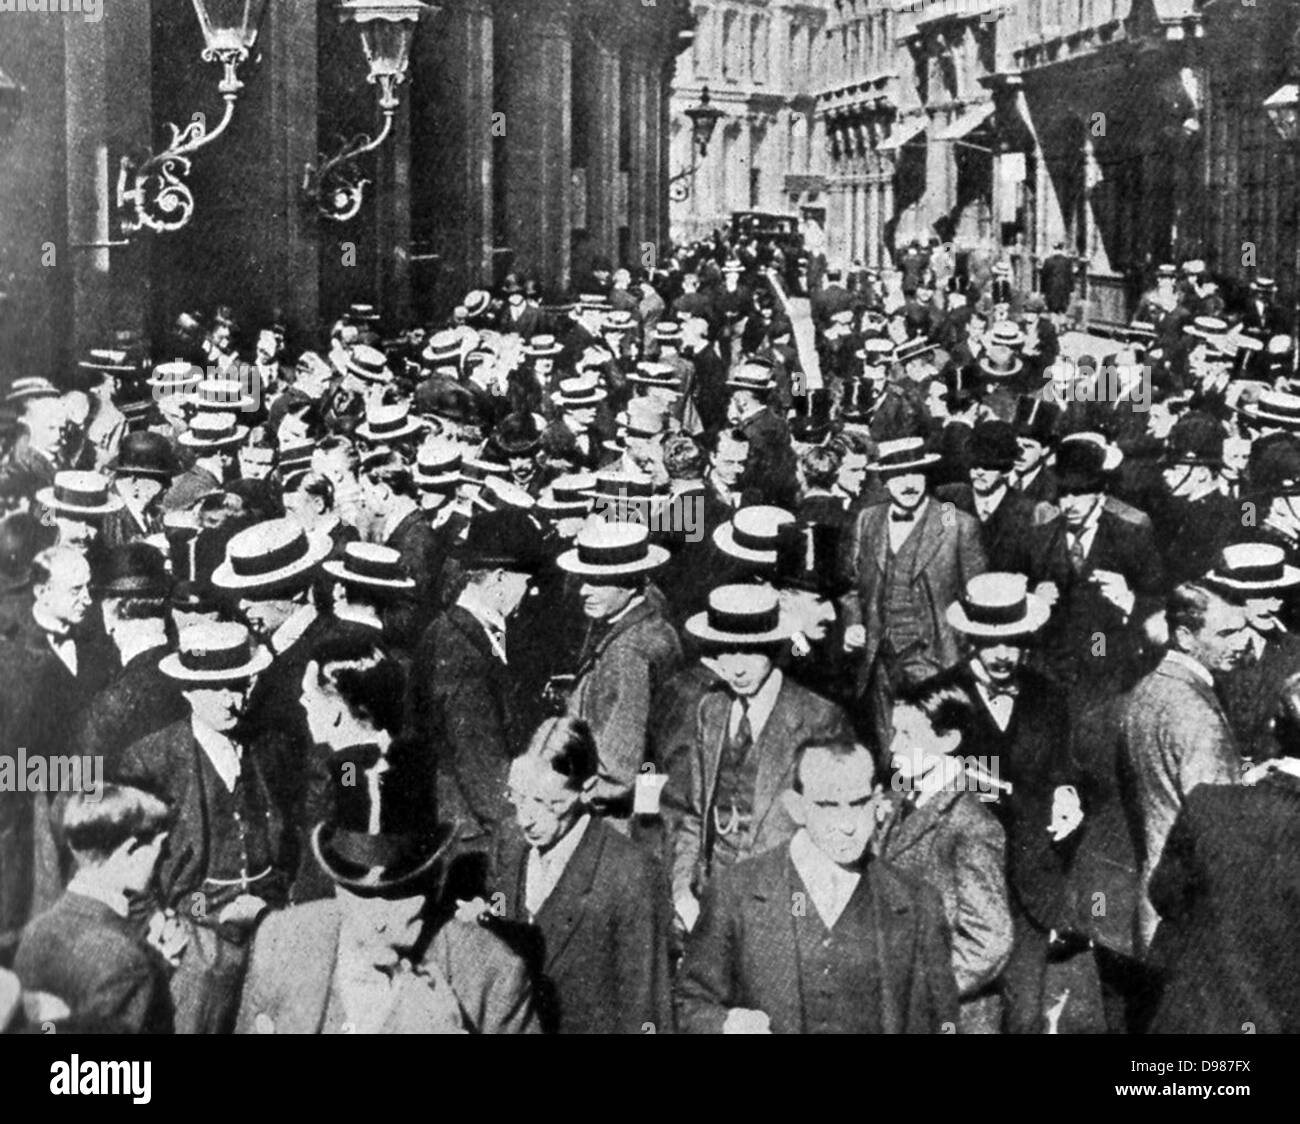 Crowds in financial district, London, during the days of tension. Stock Photo